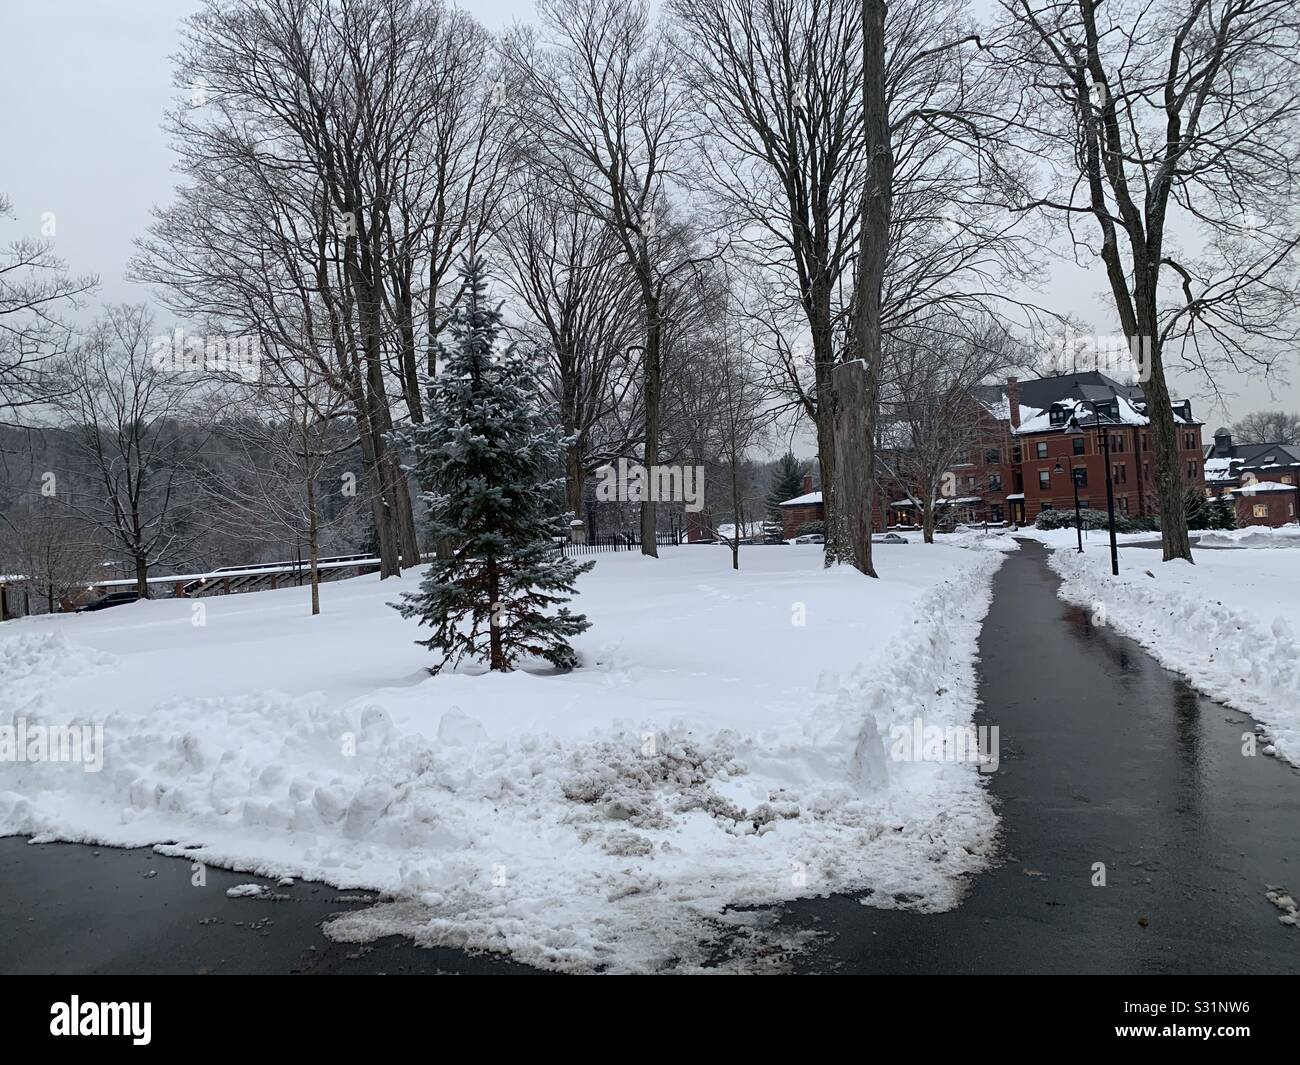 Snow on a college campus Stock Photo